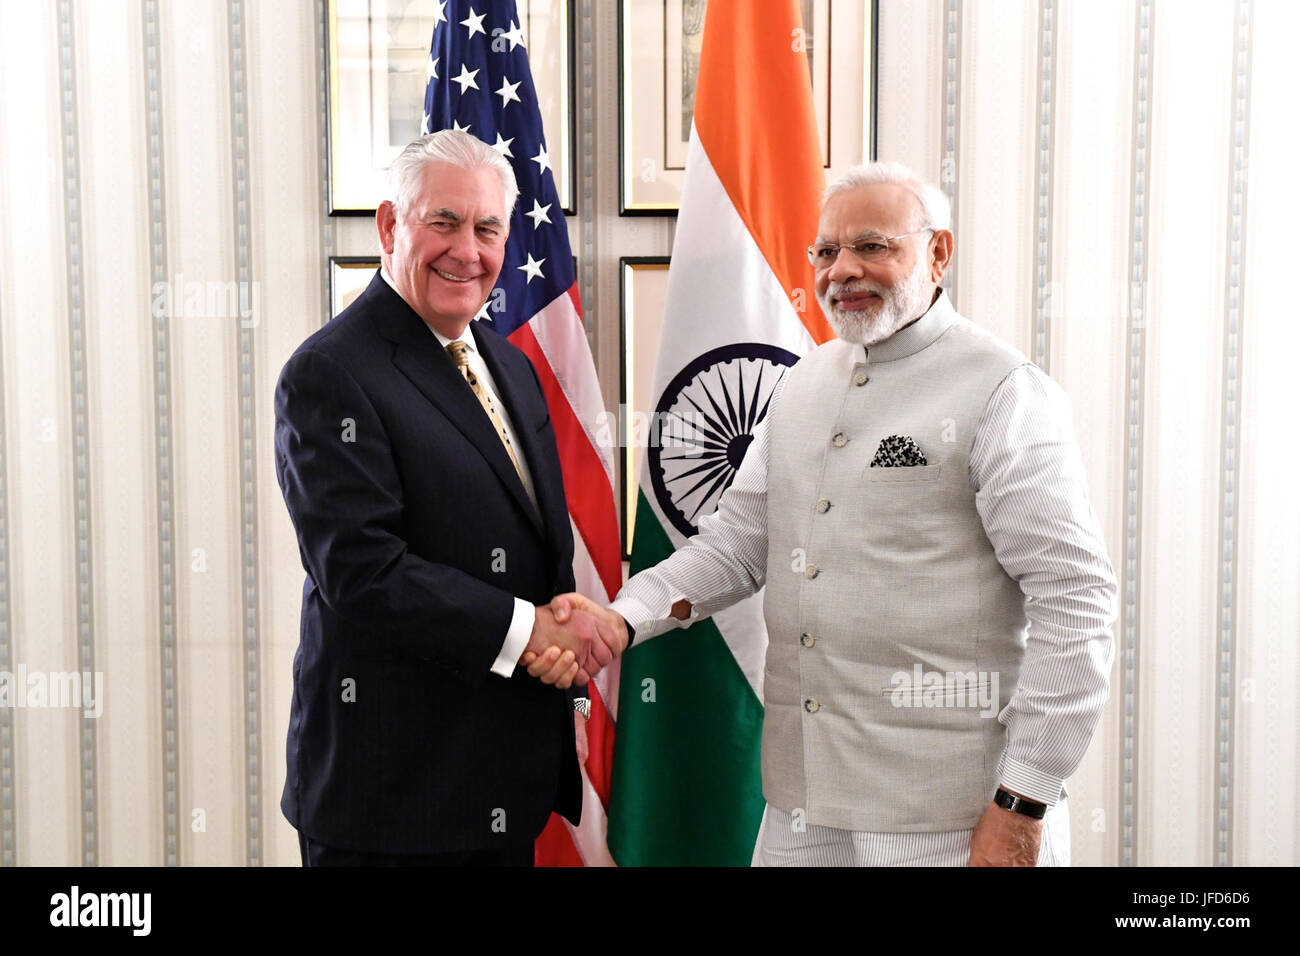 U.S. Secretary of State Rex Tillerson meets with Indian Prime Minister Narendra Modi in Washington, D.C., on June 26, 2017. Stock Photo